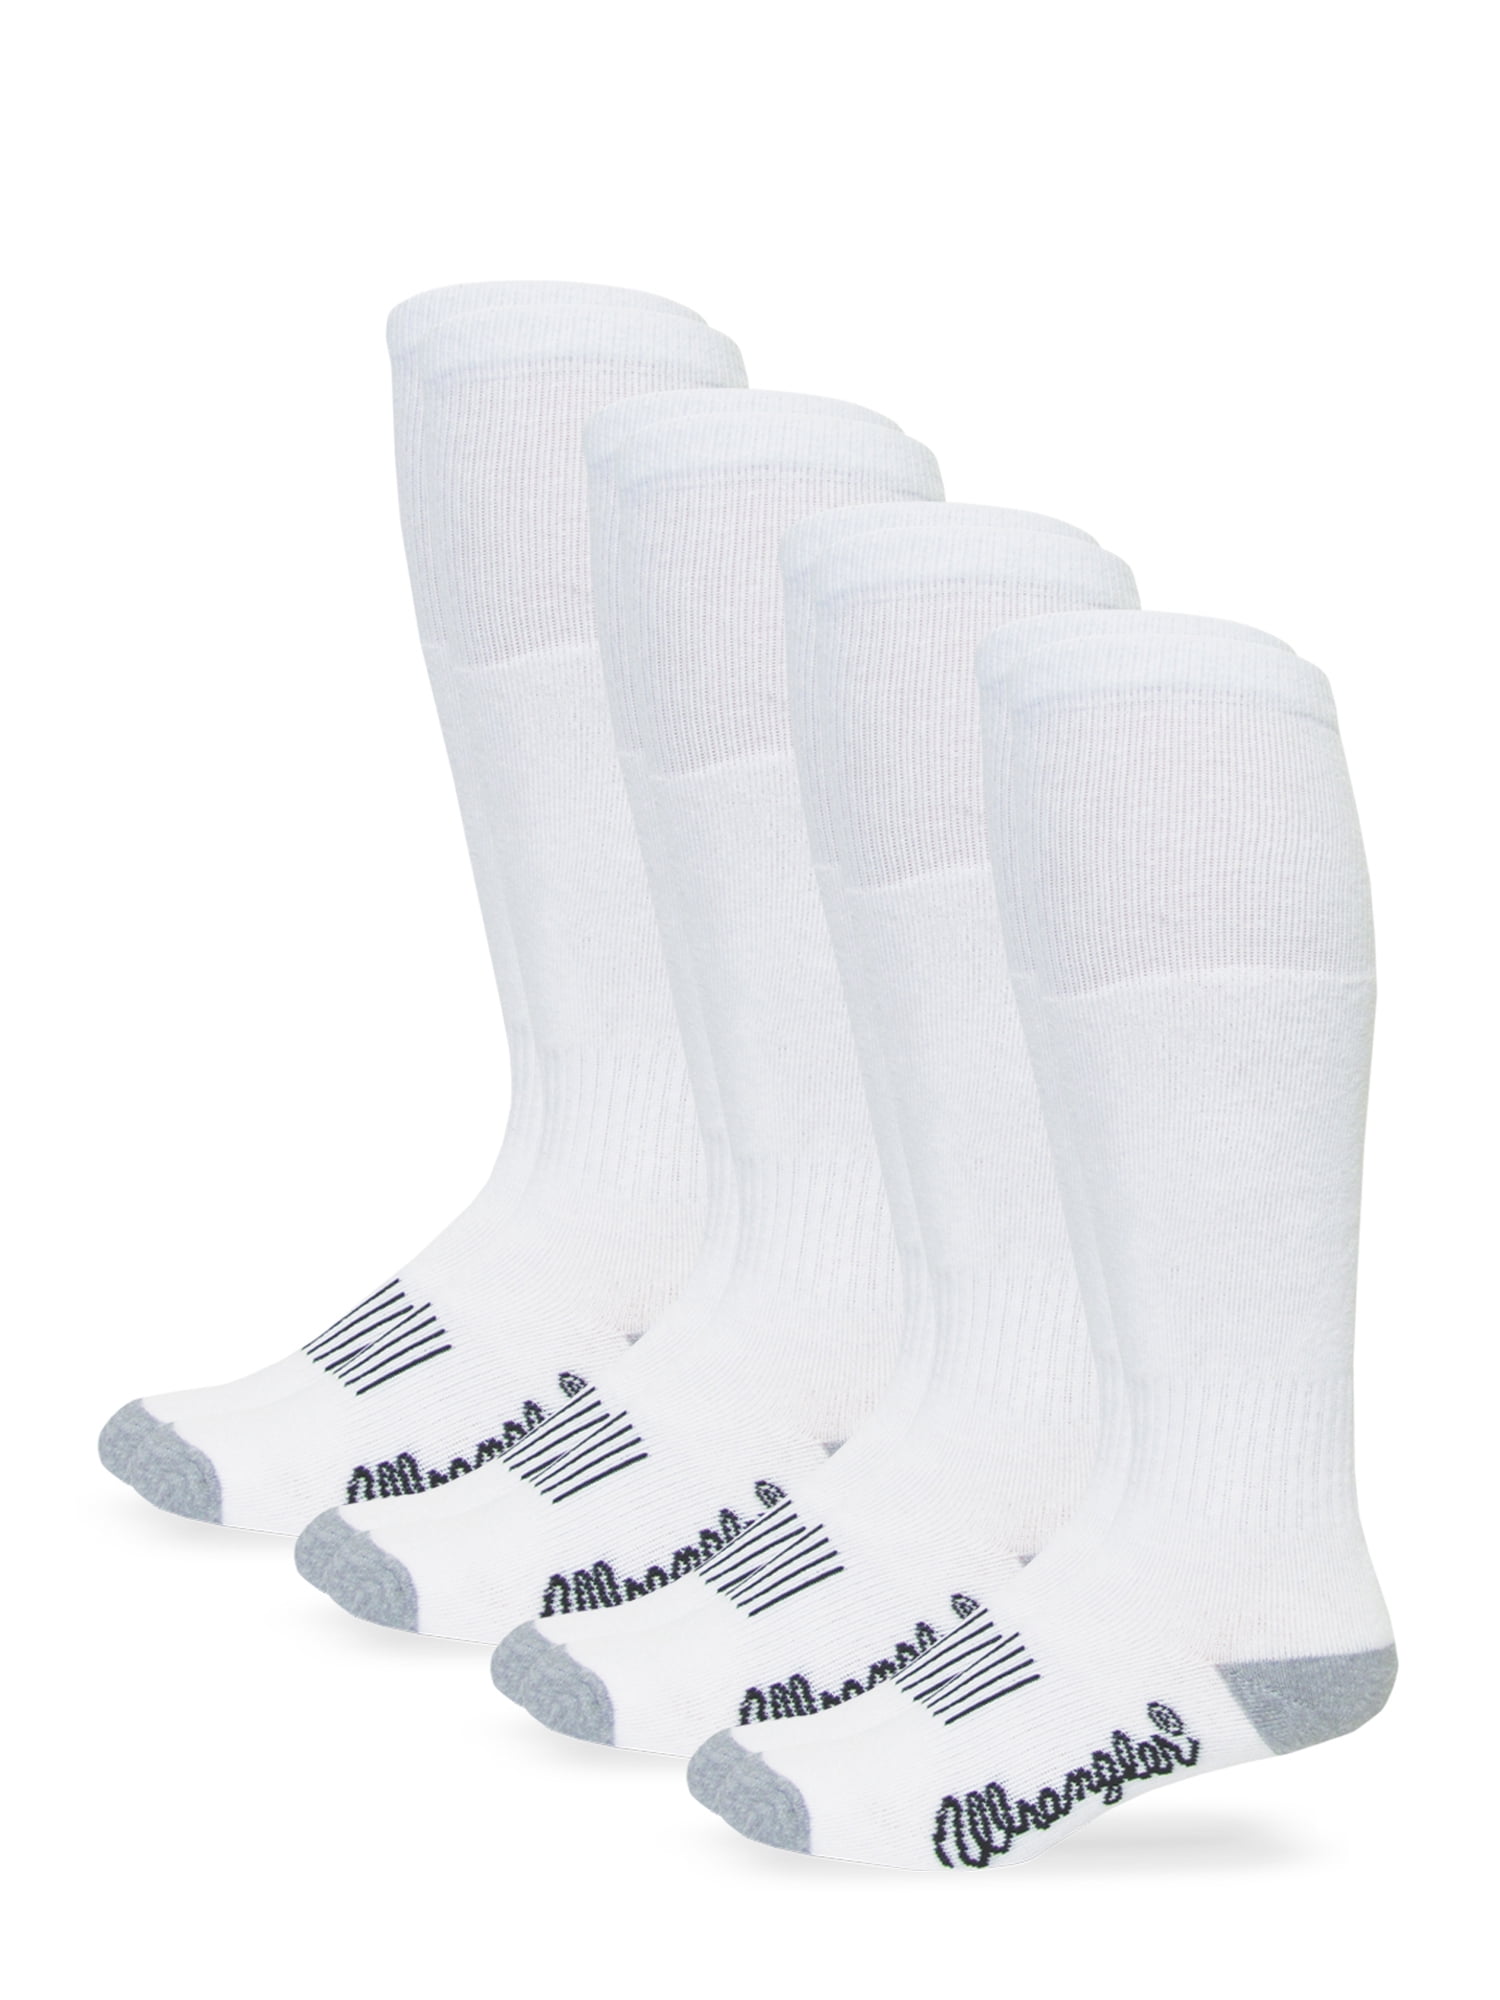 FLOSO Mens Premium Quality Cotton Rich Cushion Sole Socks MB193 Pack Of 3 